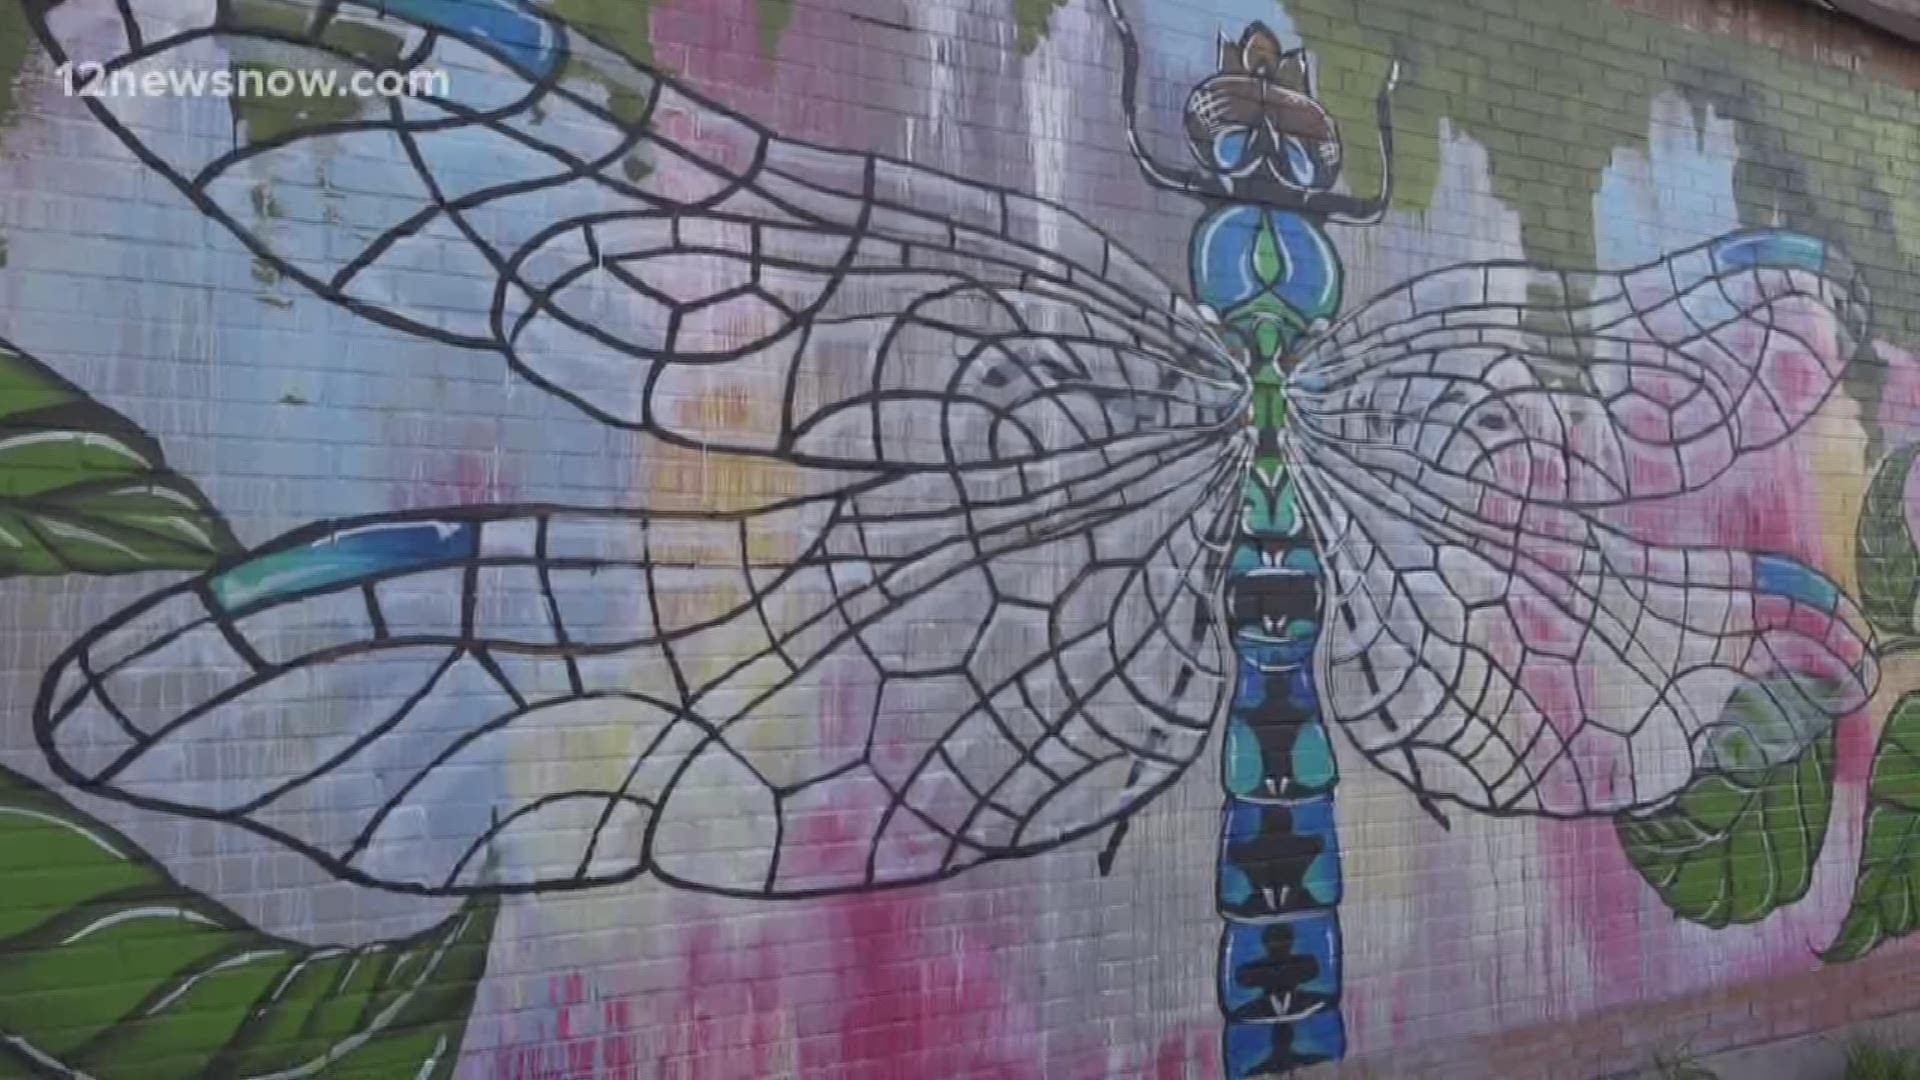 Artists around Beaumont are getting there chance to let the creative juices flow. They are partnering with the City of Beaumont to bring more color to the streets of downtown.